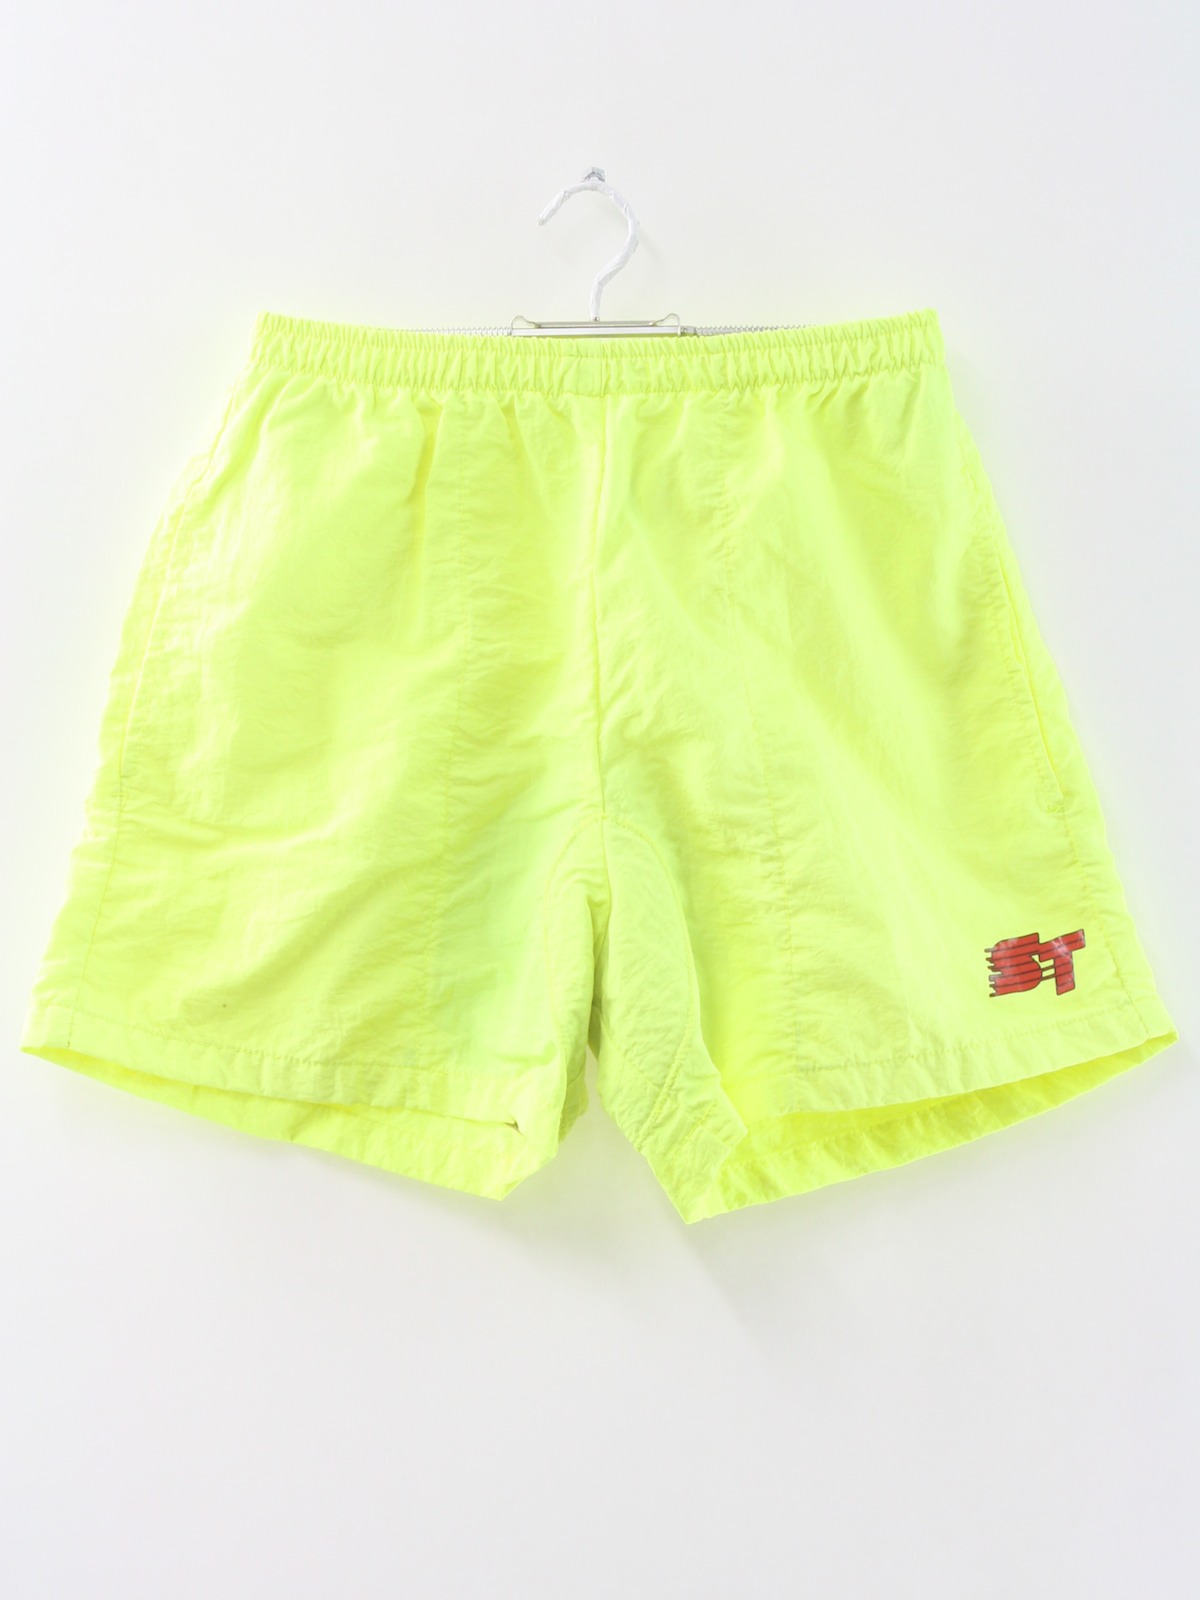 Cycle wear 1980s Vintage Shorts: 80s -Cycle wear- Mens neon yellow ...